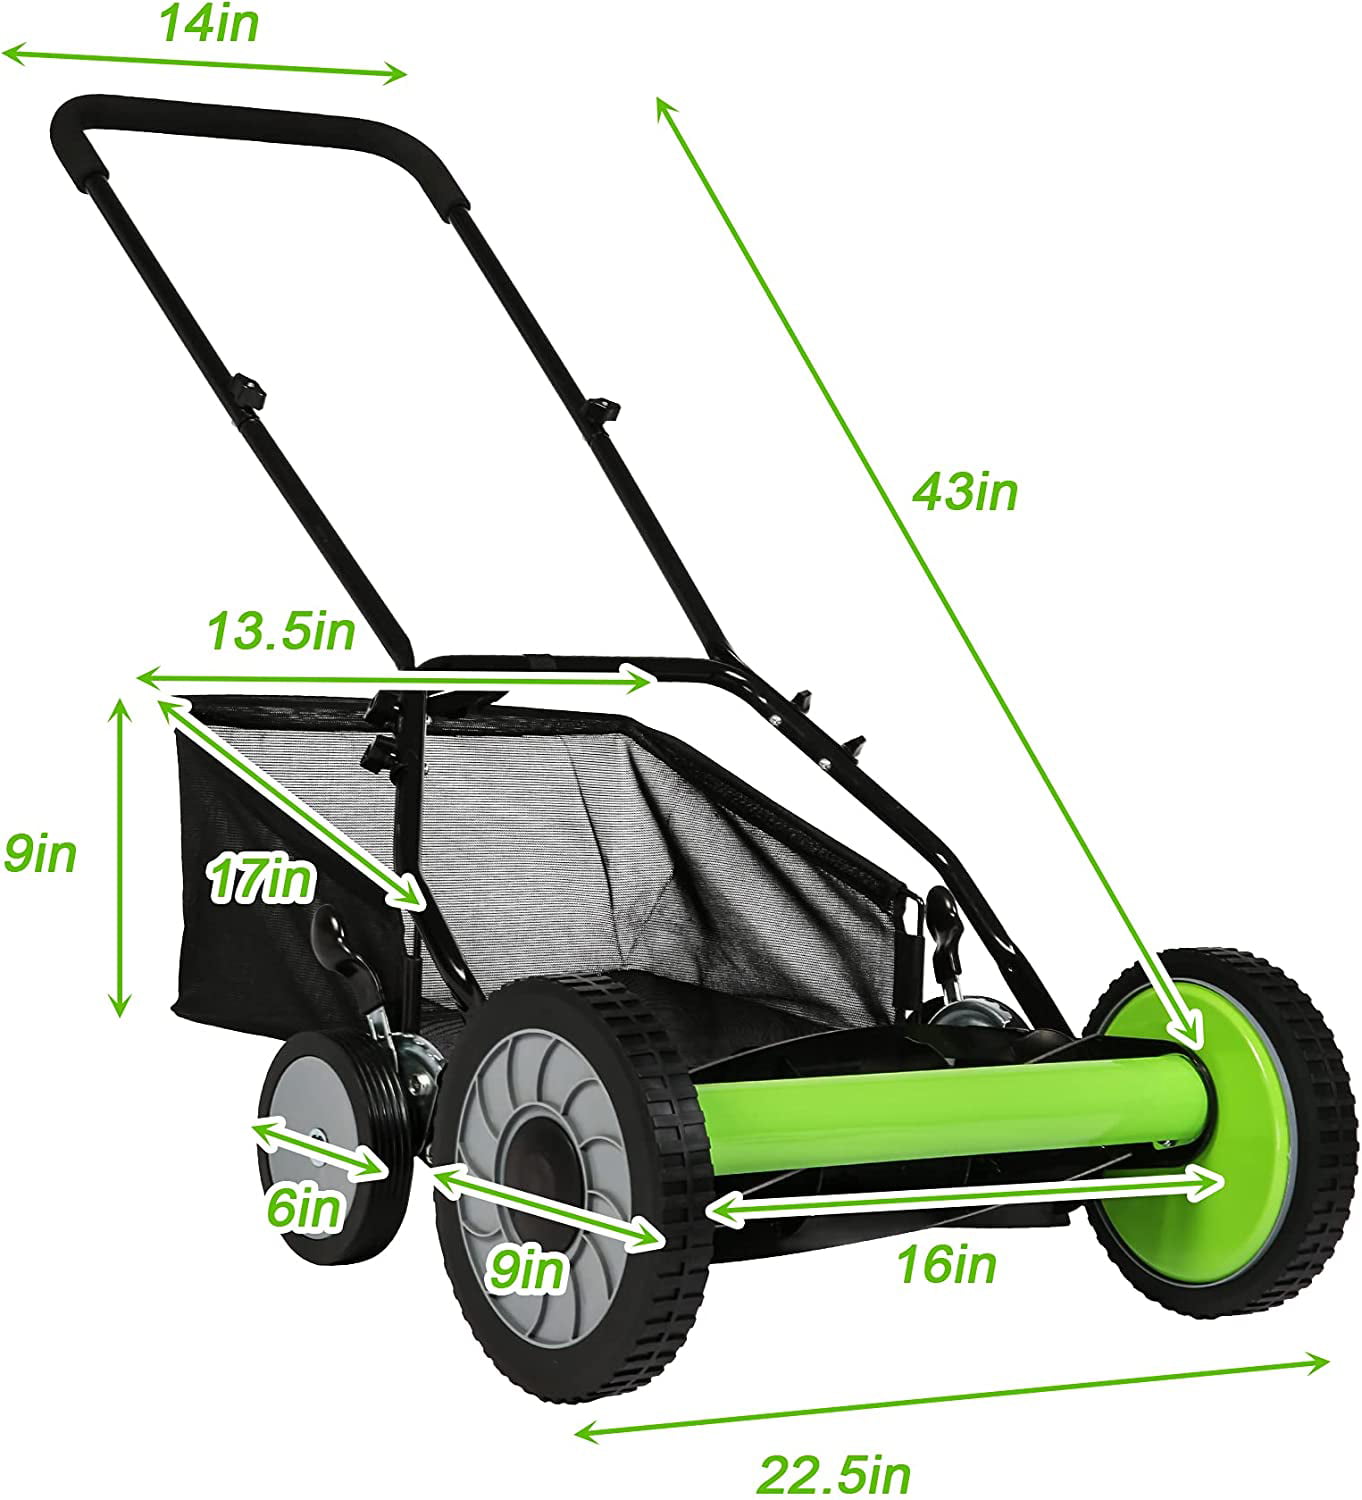 Sharpex Push Manual Lawn Mower with Grass Catcher | 16-Inch Reel Lawn Mower  with 5-Position Height Adjustment | Classic Push Grass Cutter Machine for